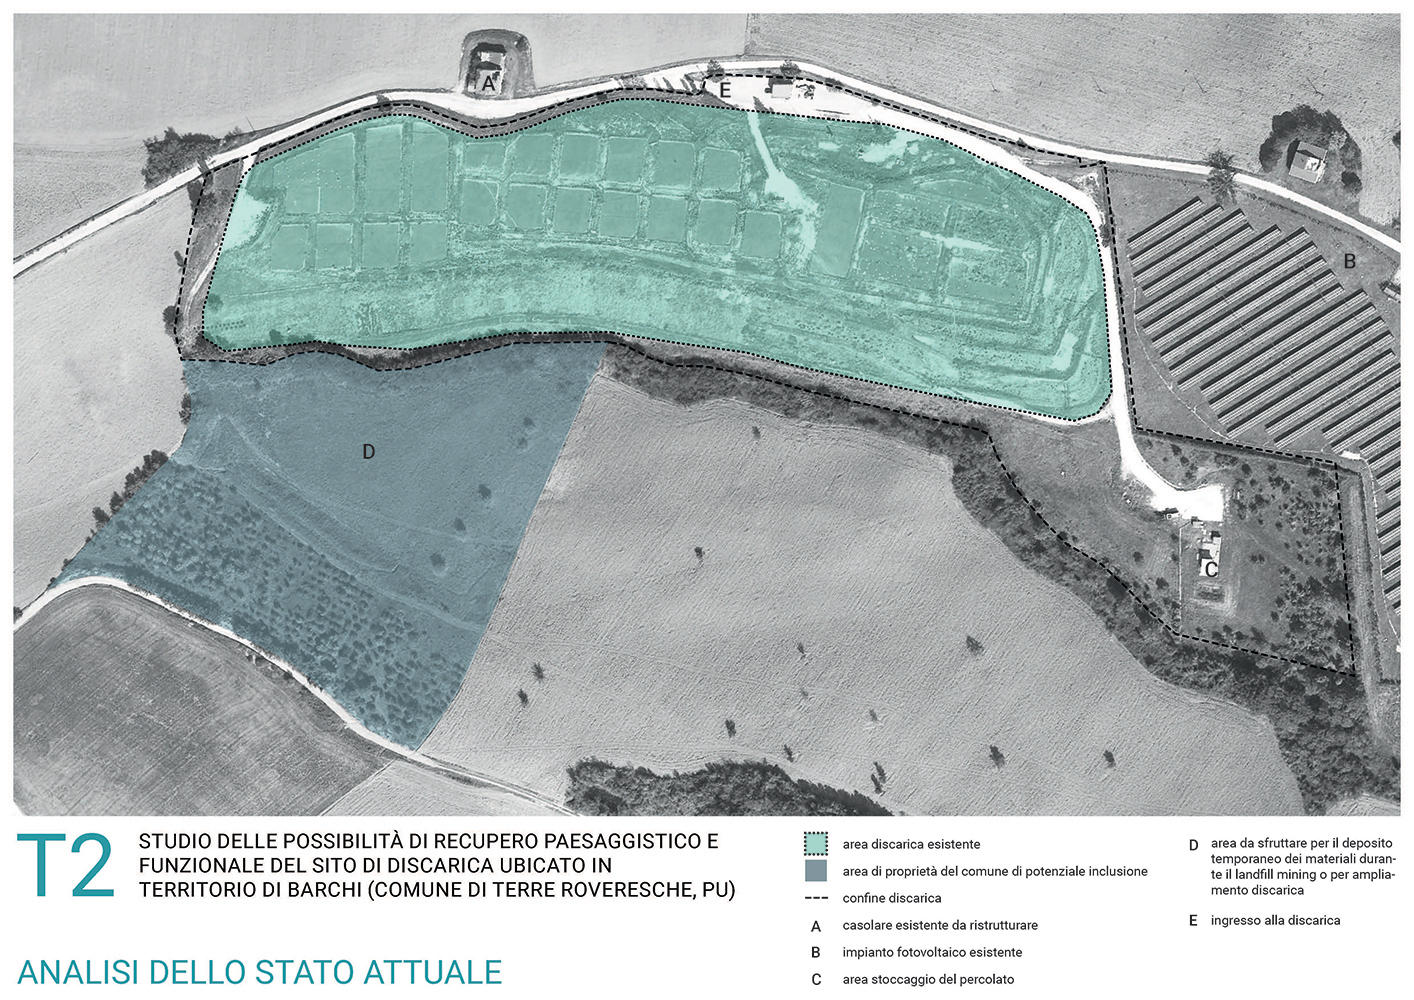 Study of the possibility of undertaking remedial and functional landscaping of the Ca’ Rafaneto di Barchi landfill (Pesaro and Urbino Province, IT)